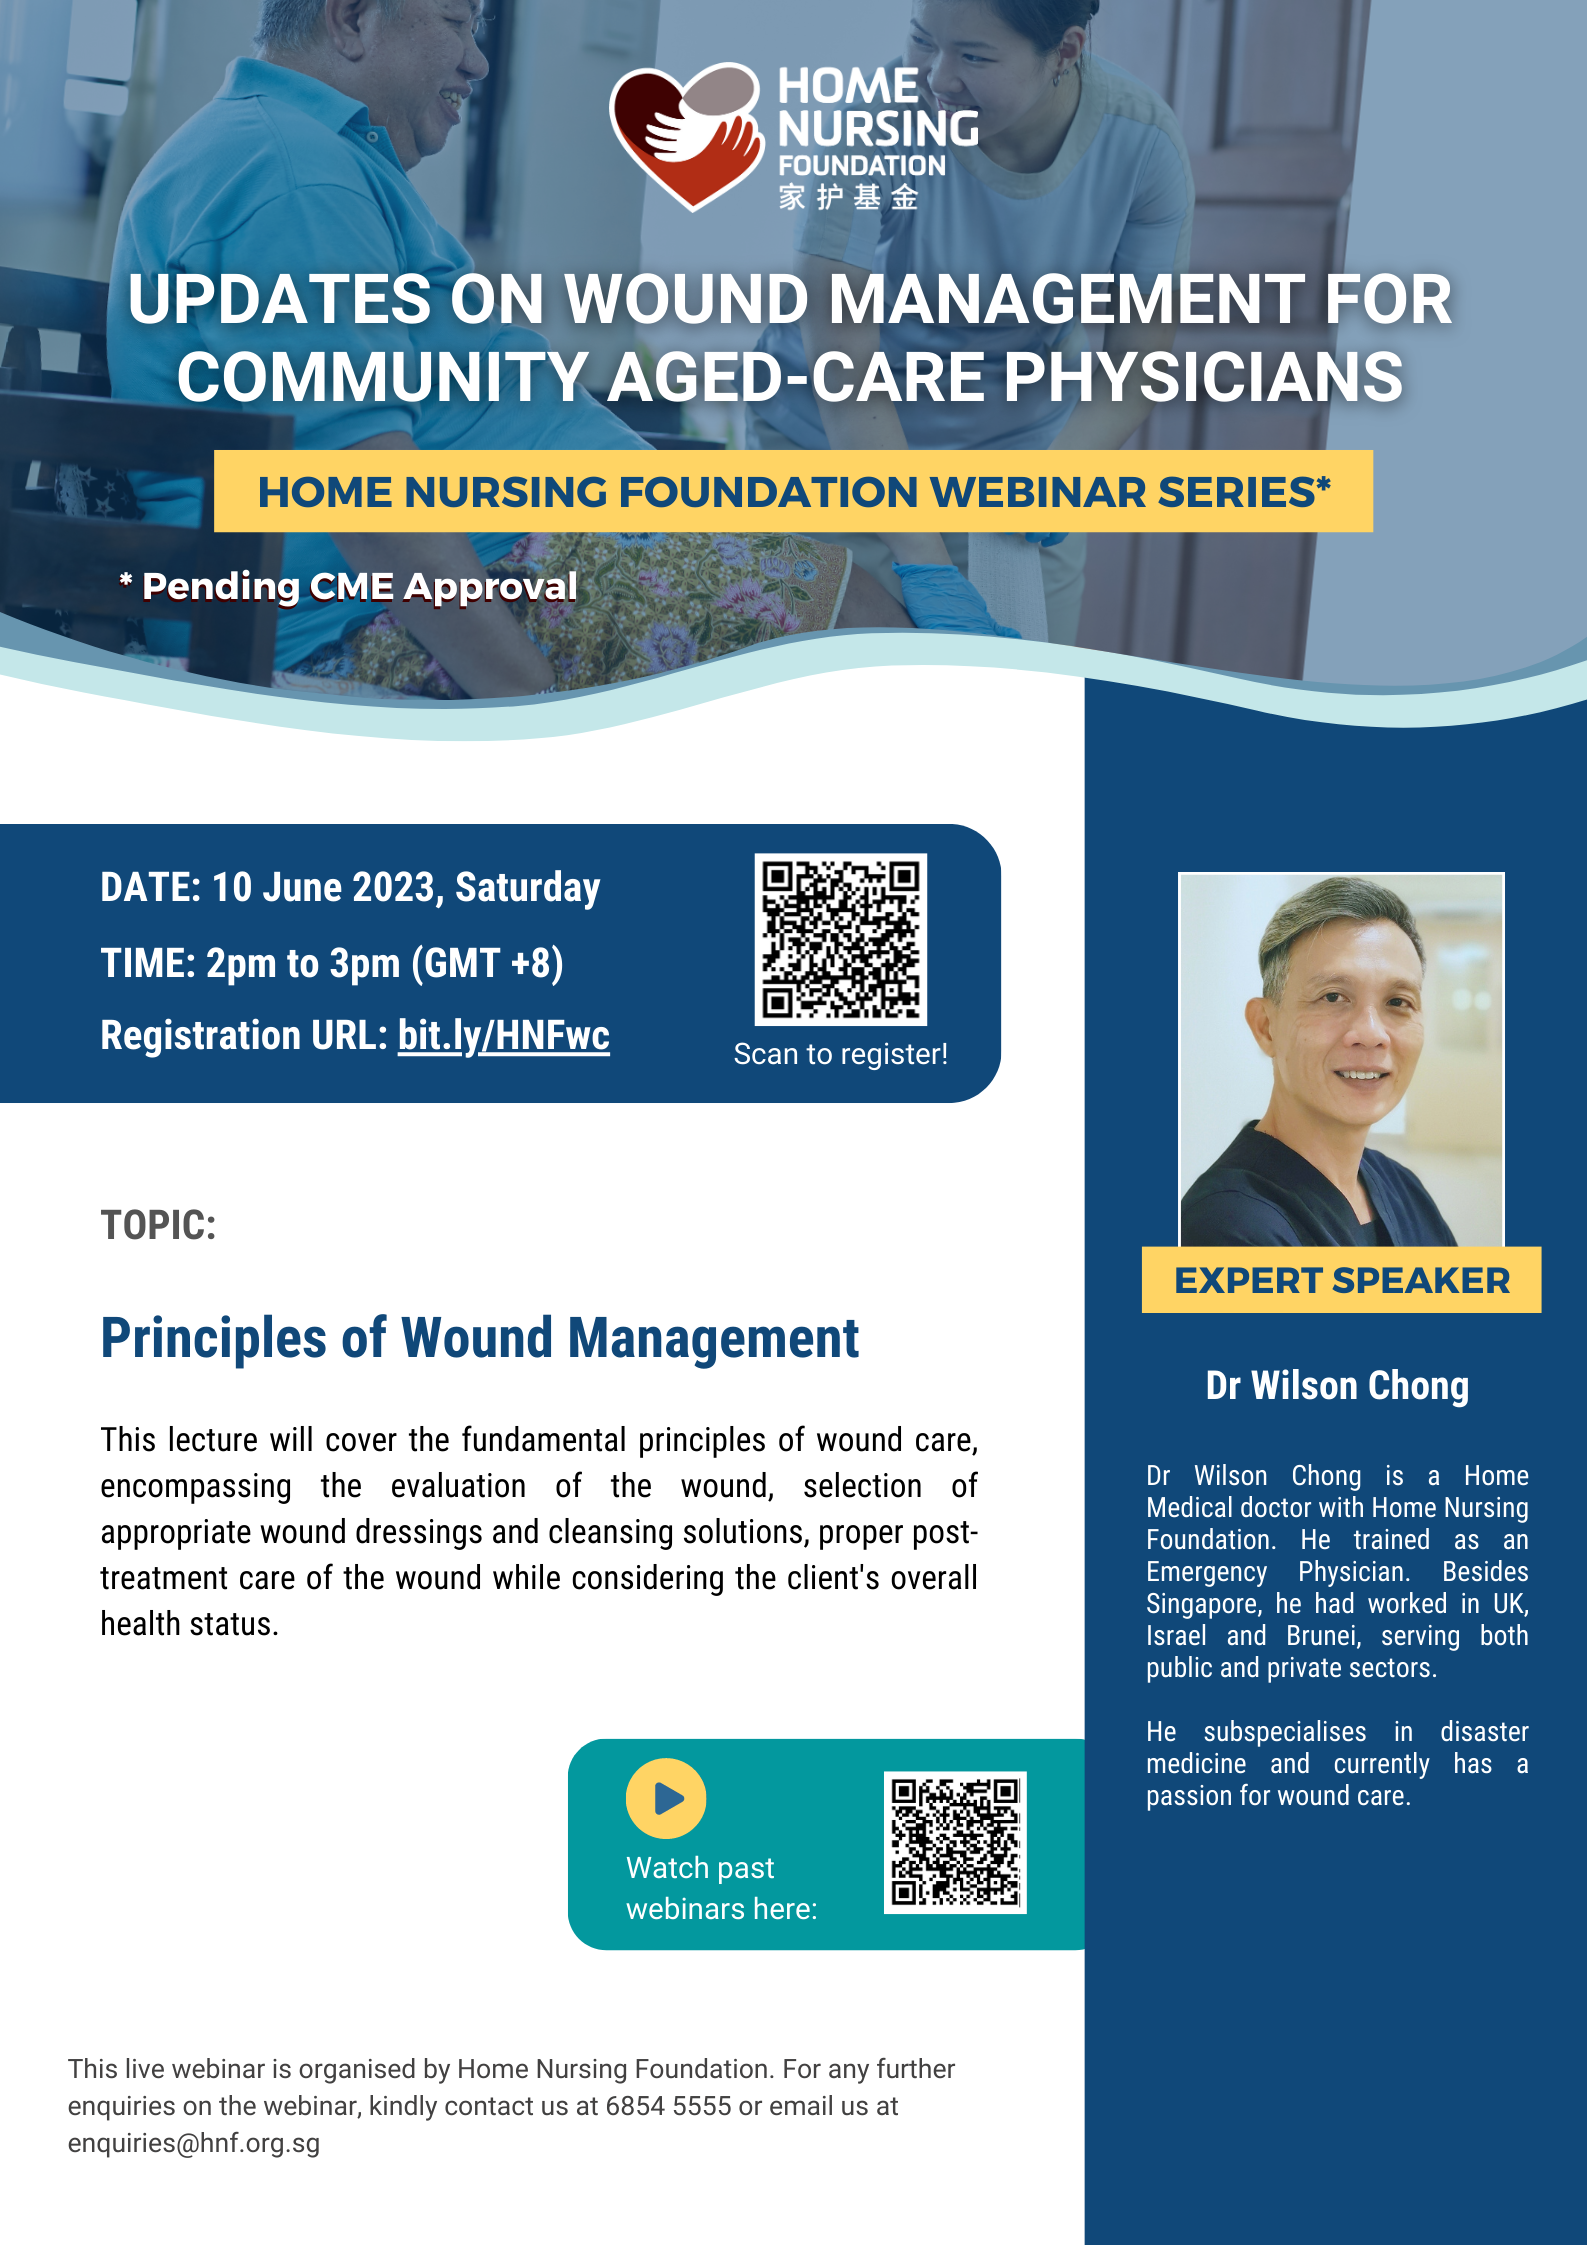 10 Jun 2023 HNF CME Webinar - Updates on Wound Management For Community Aged-Care Physicians.png